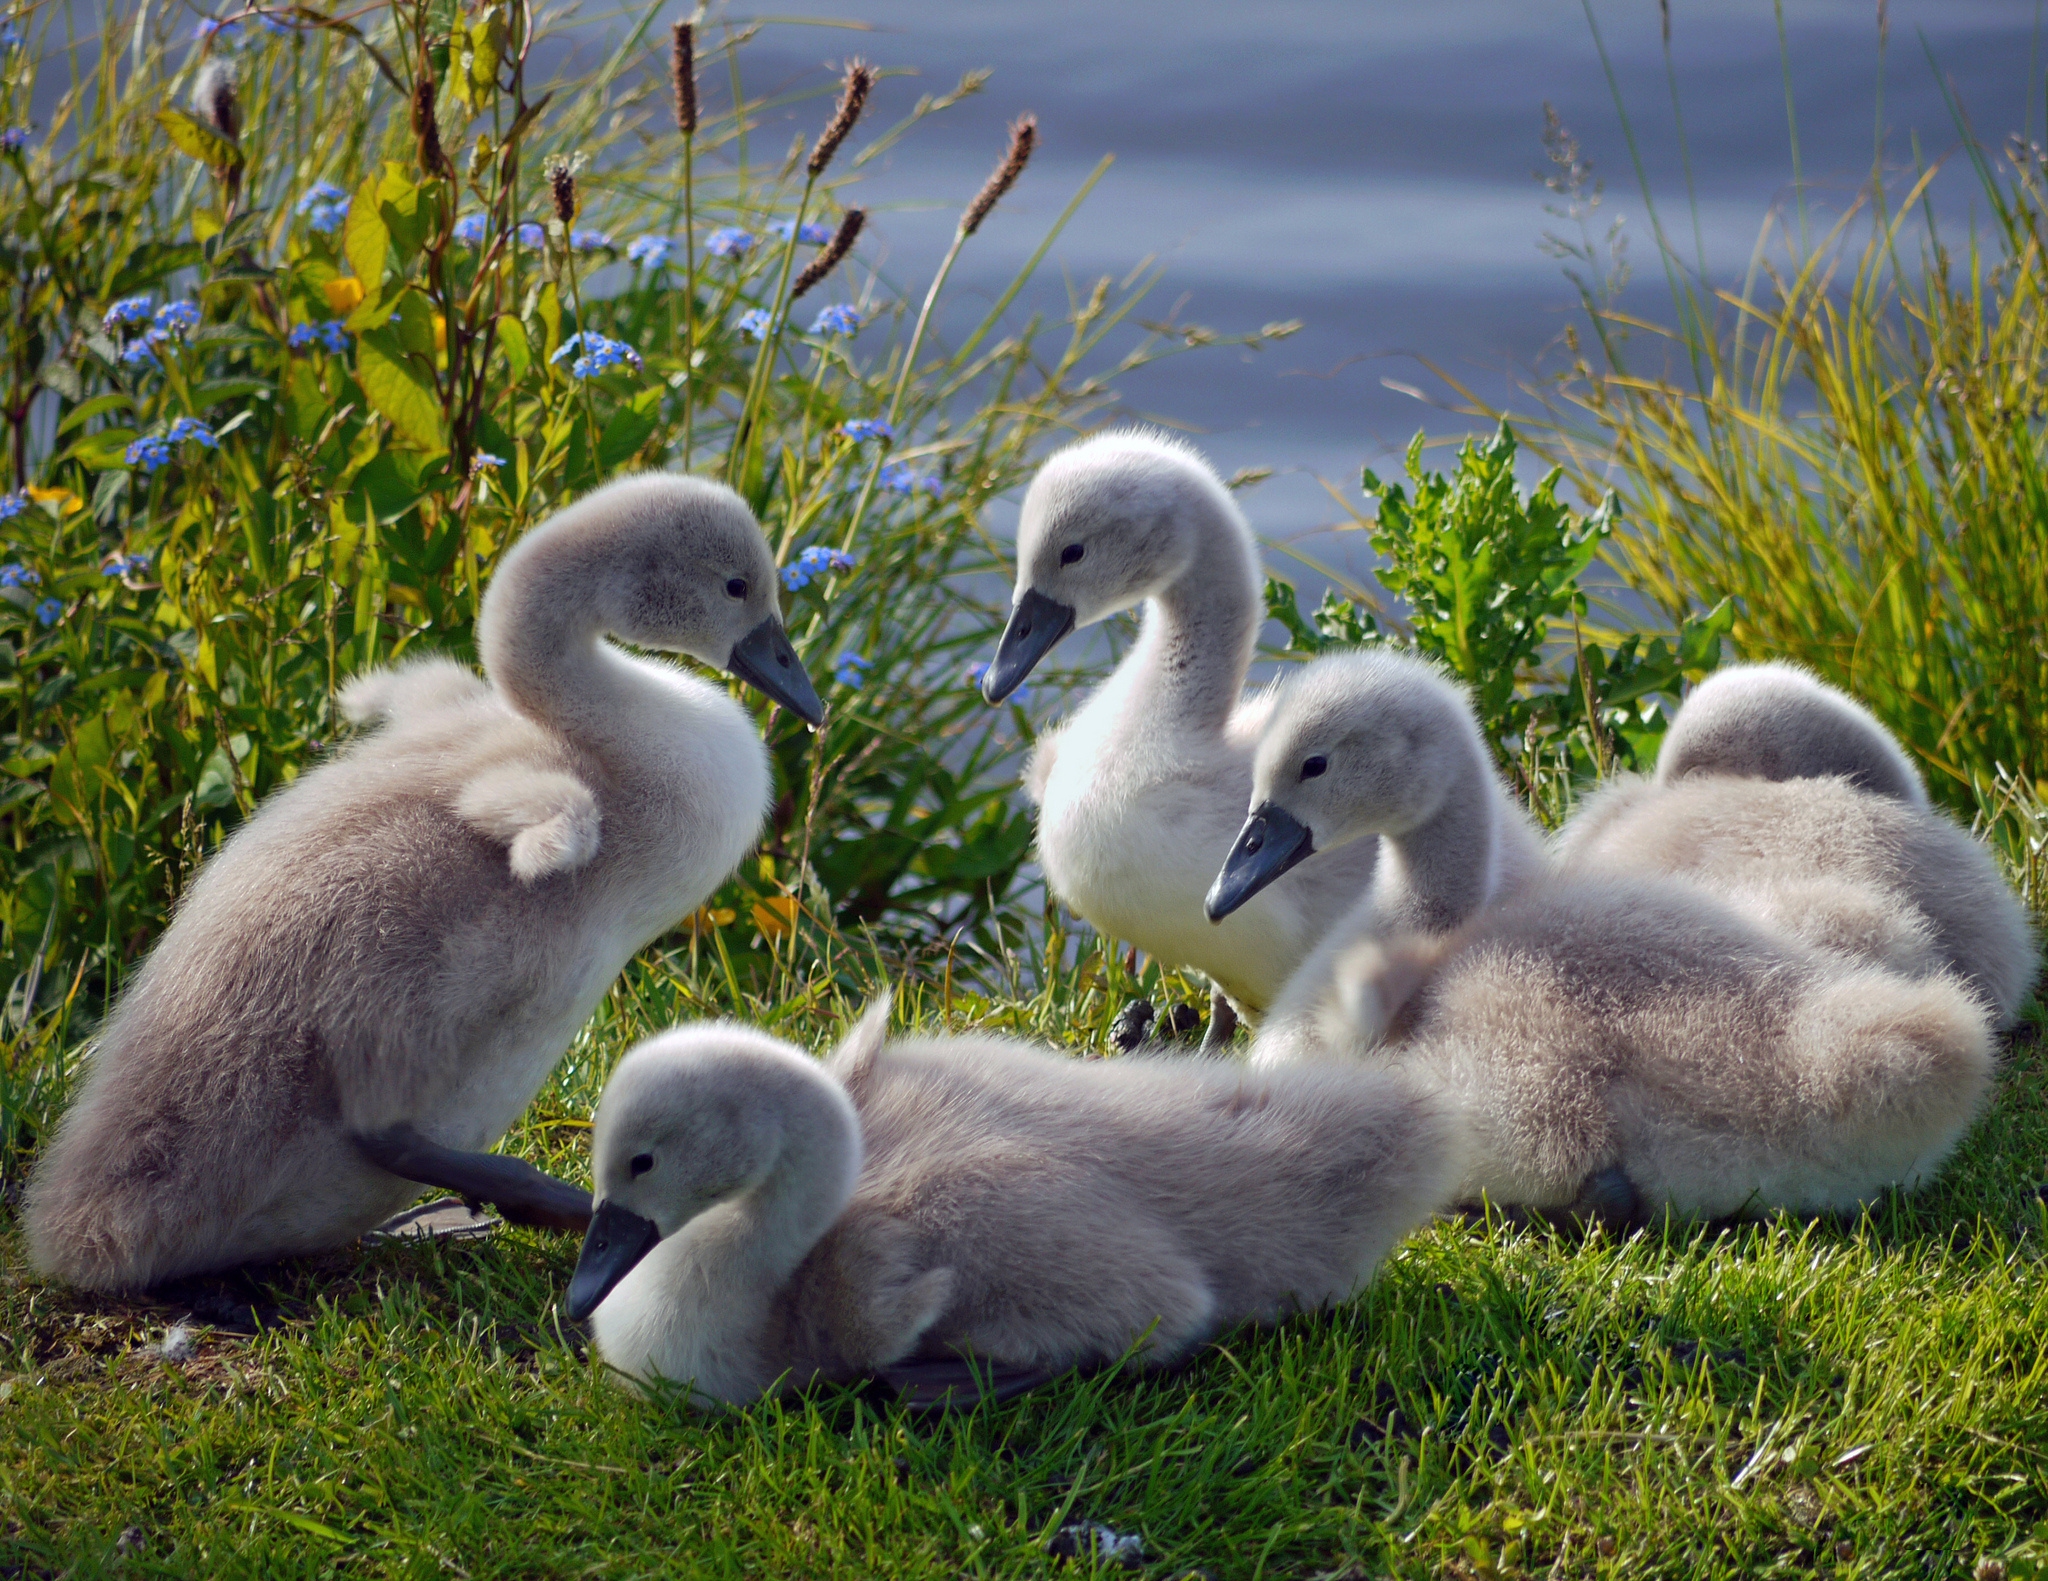 swans, animals, grass, family, flock, ducklings